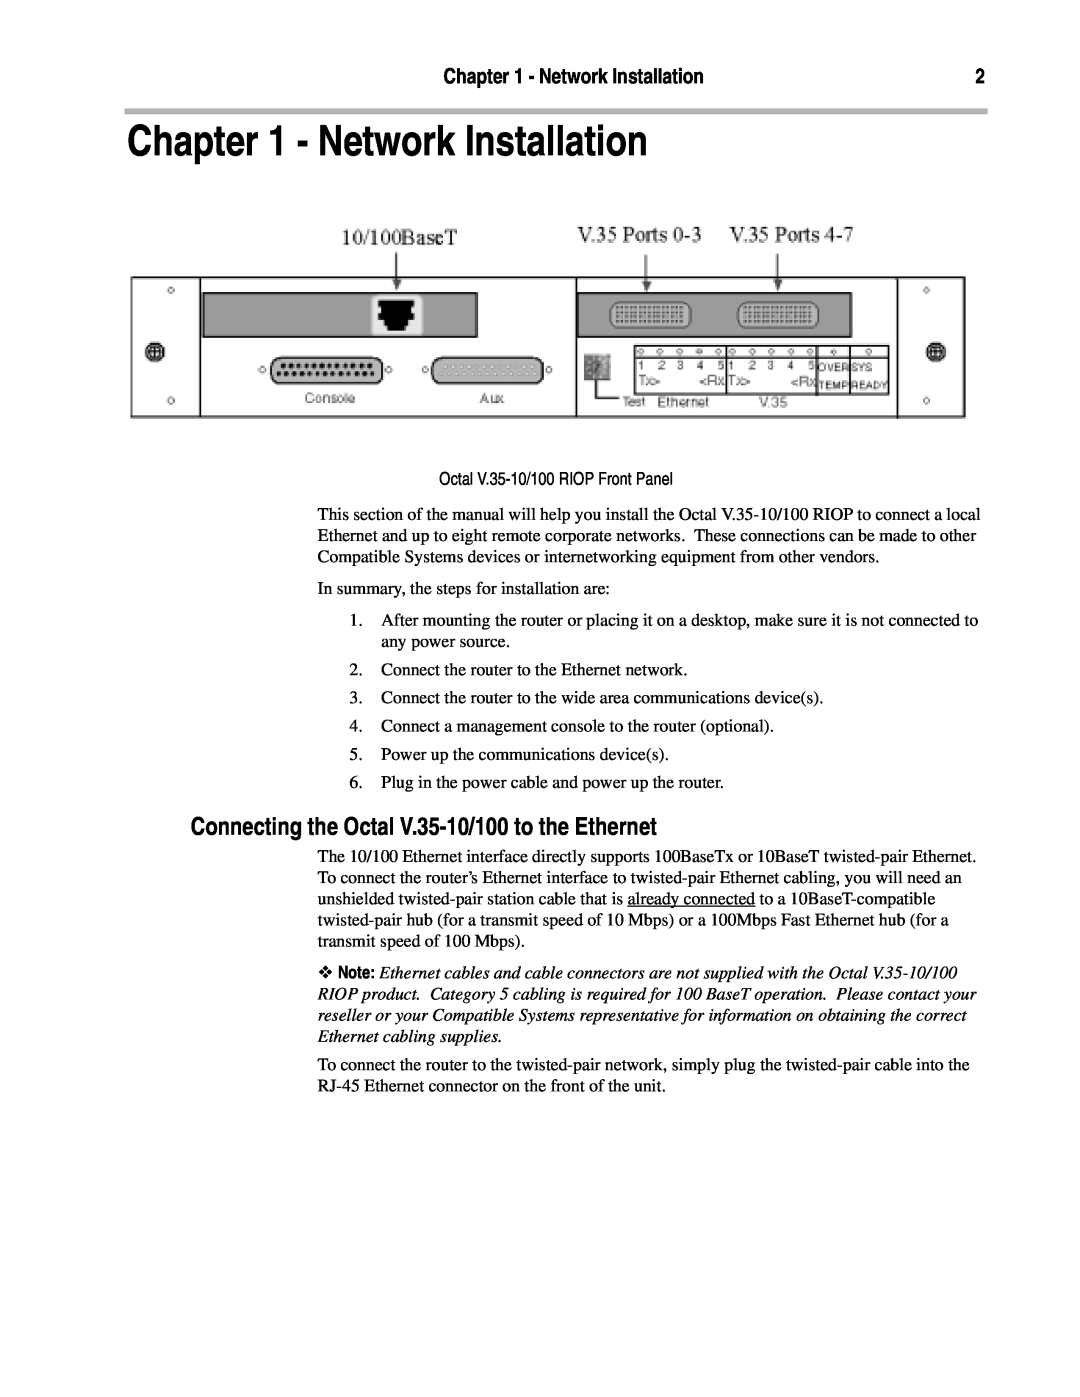 Compatible Systems manual Network Installation, Connecting the Octal V.35-10/100 to the Ethernet 